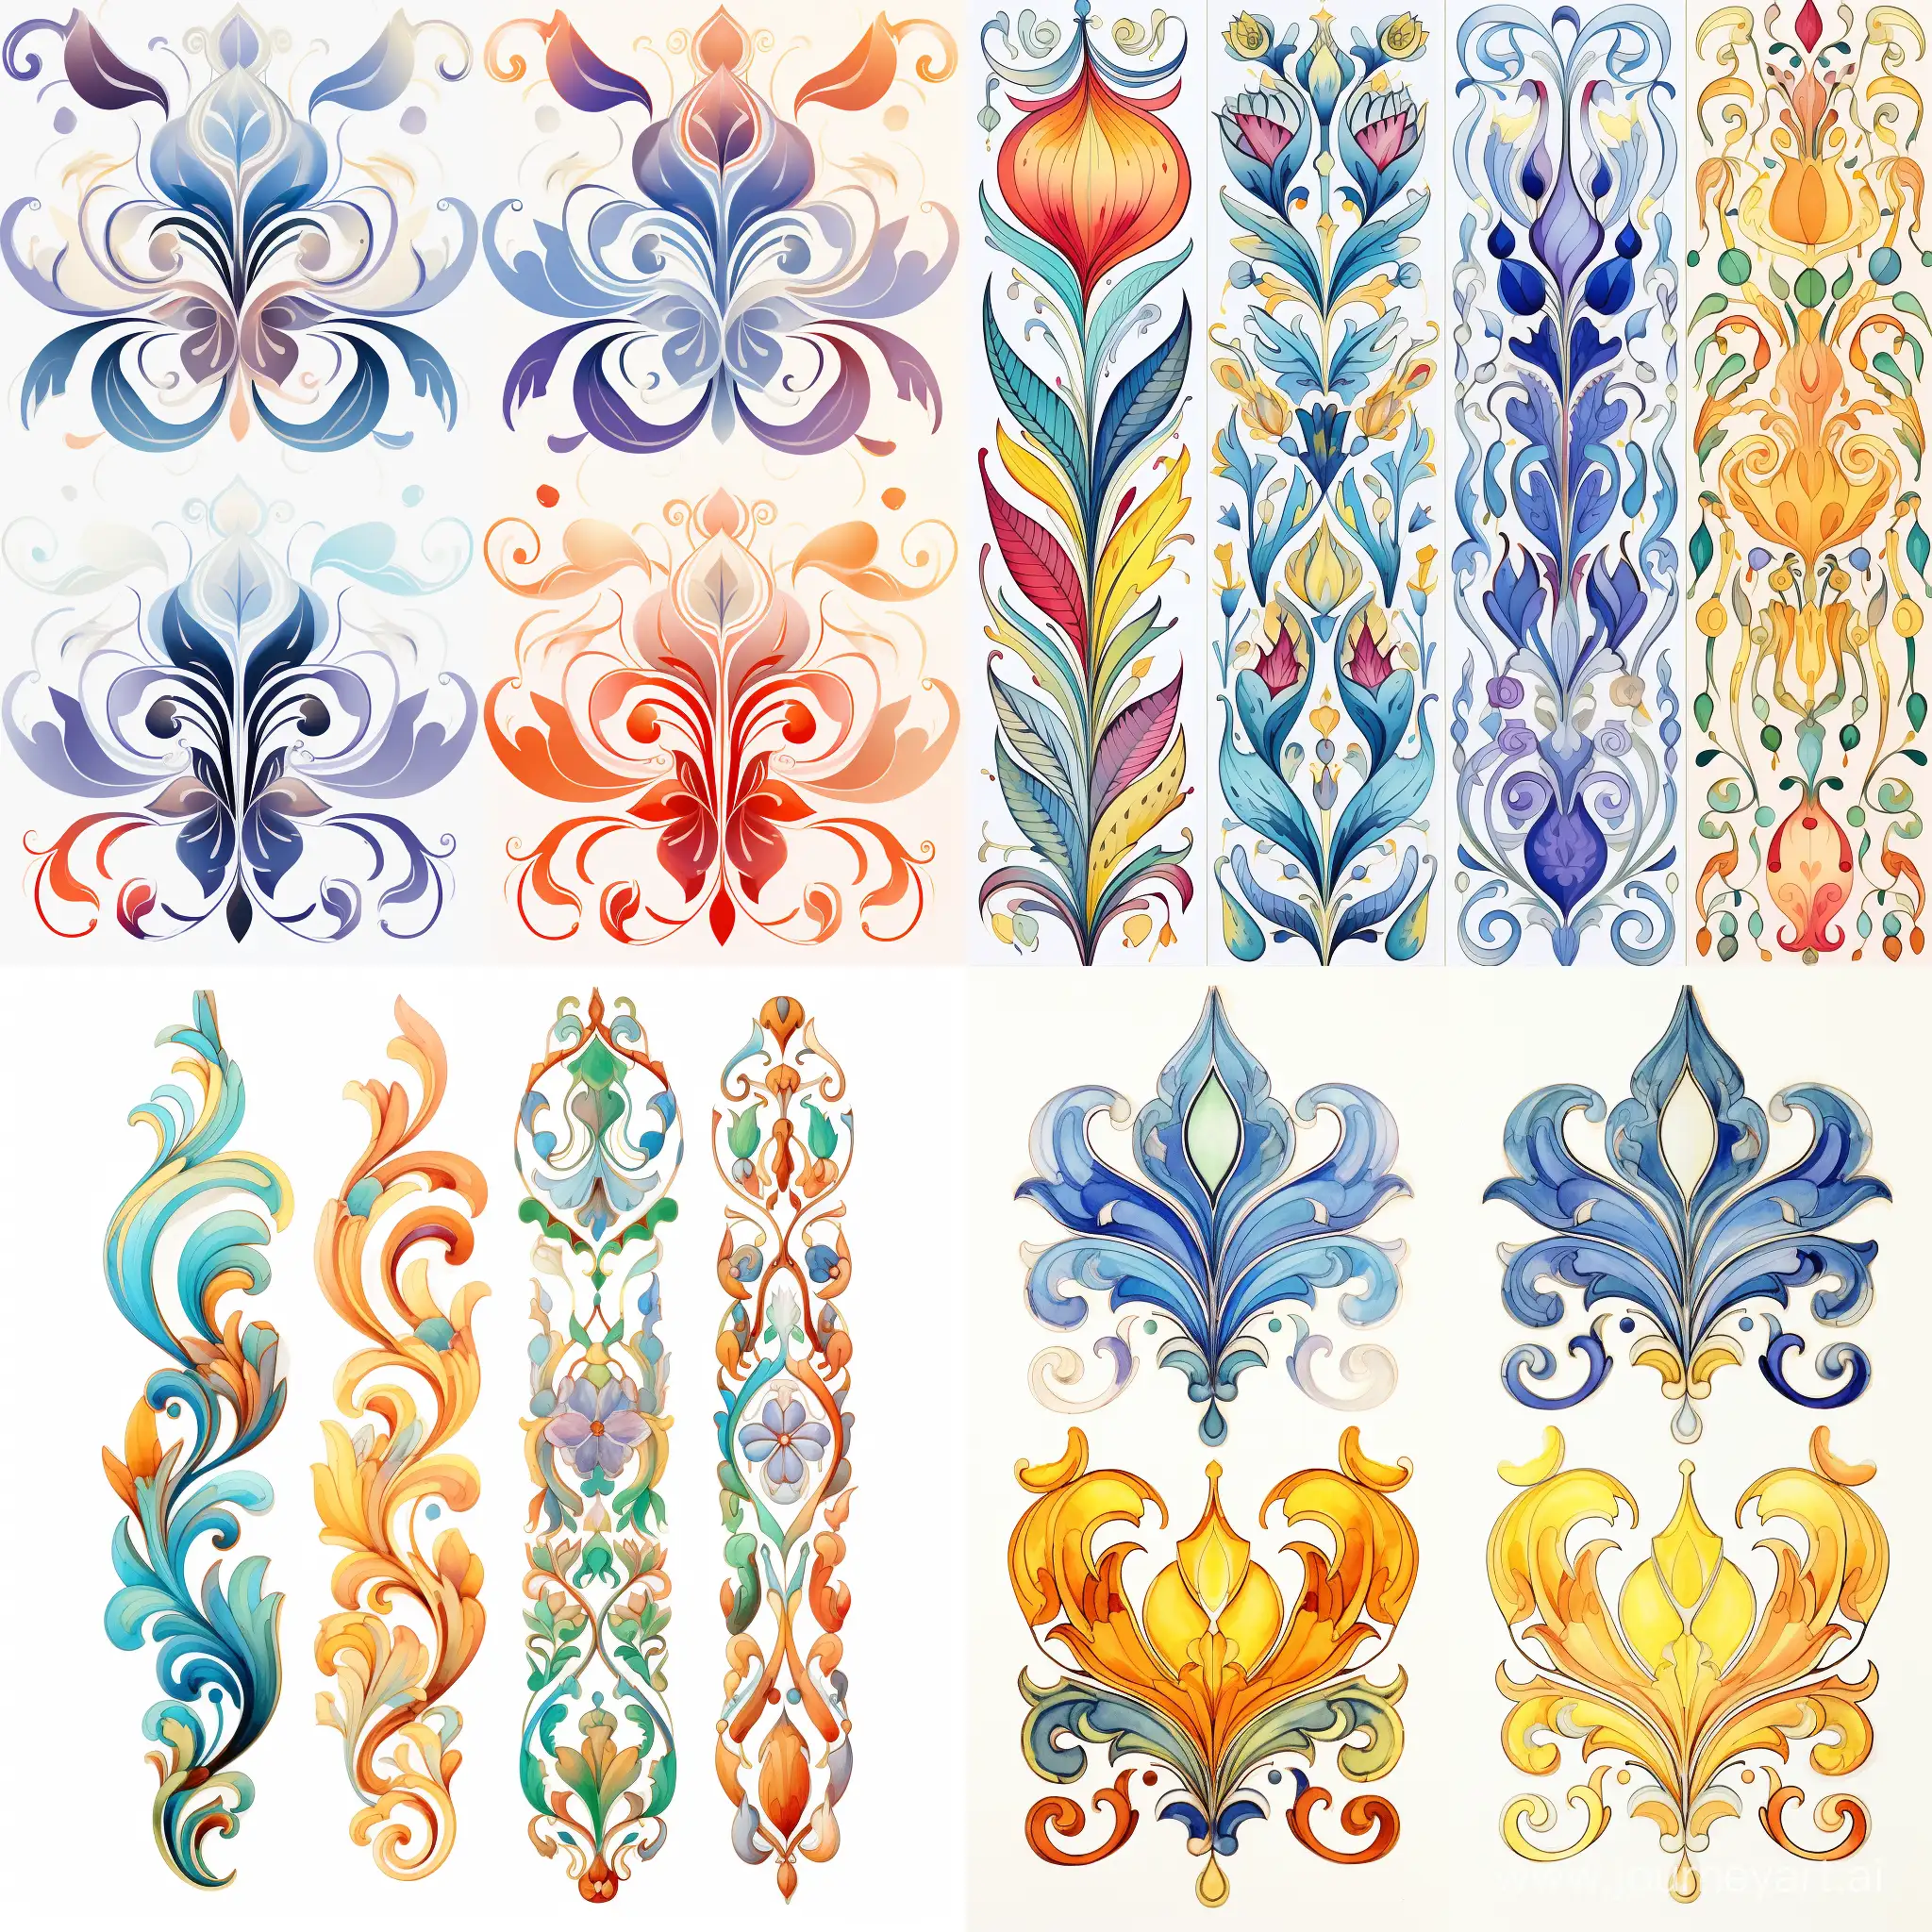 Ornament-Pattern-Variations-Stylized-Caricature-by-Vikto-Ngai-in-Watercolor